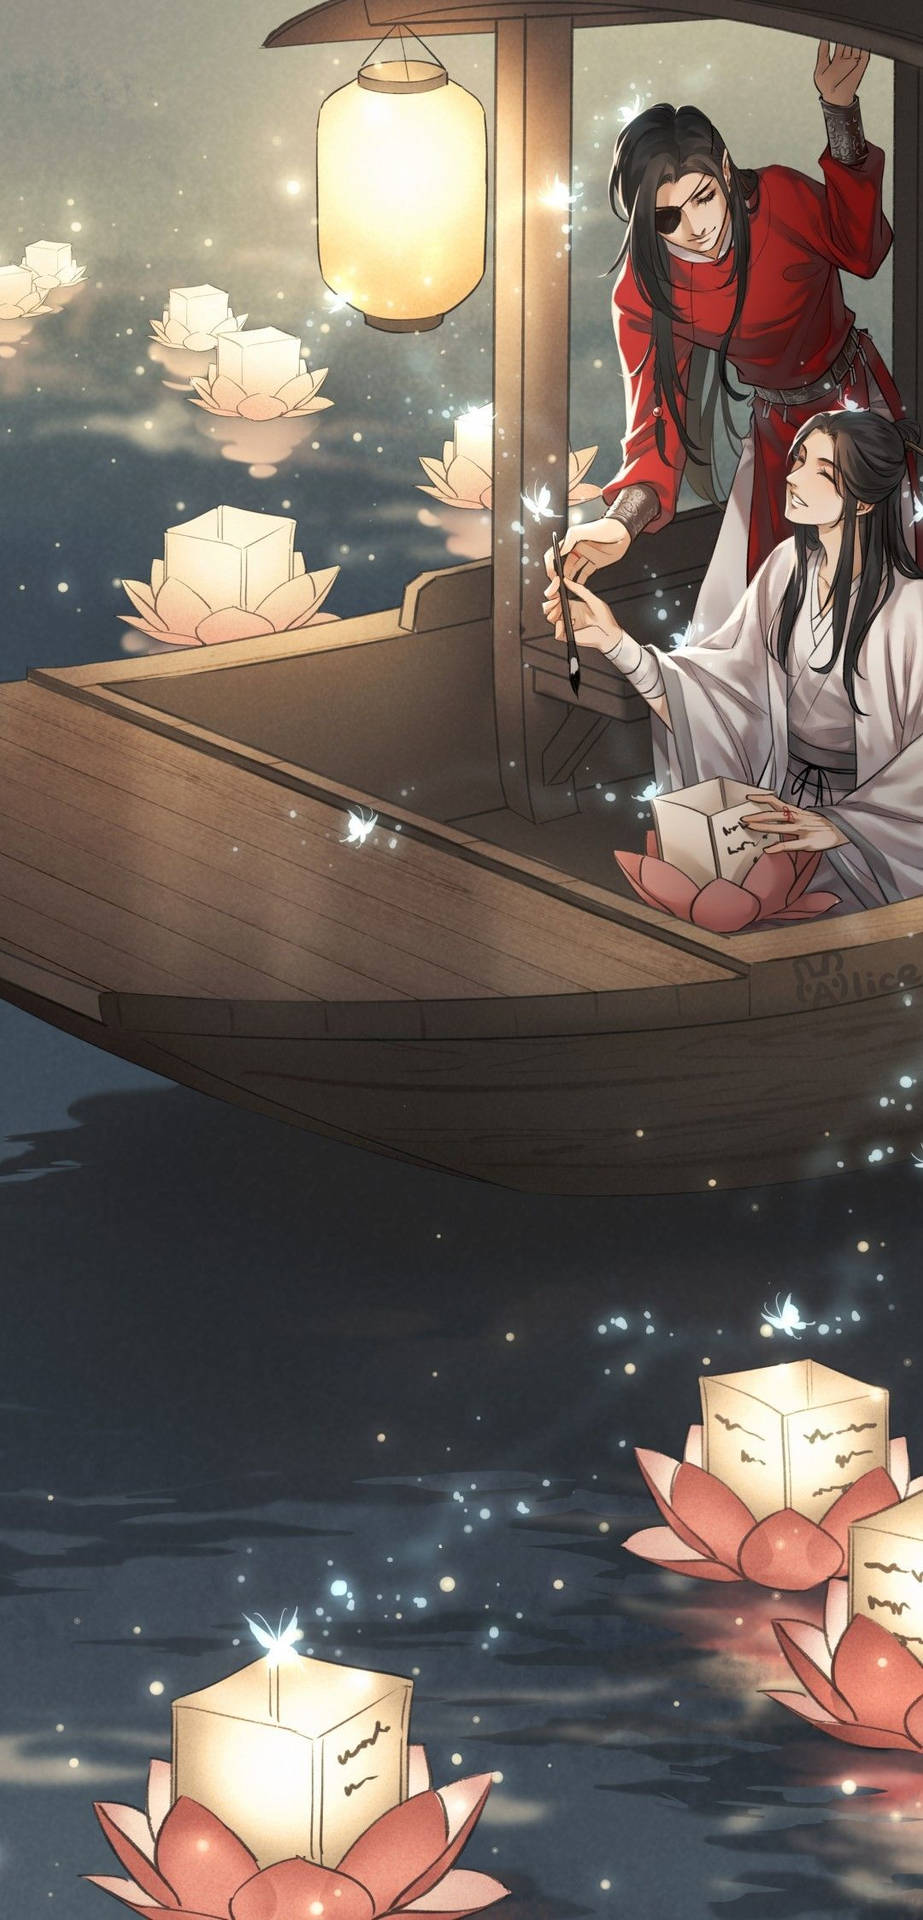 Hua Cheng And Xie On Boat